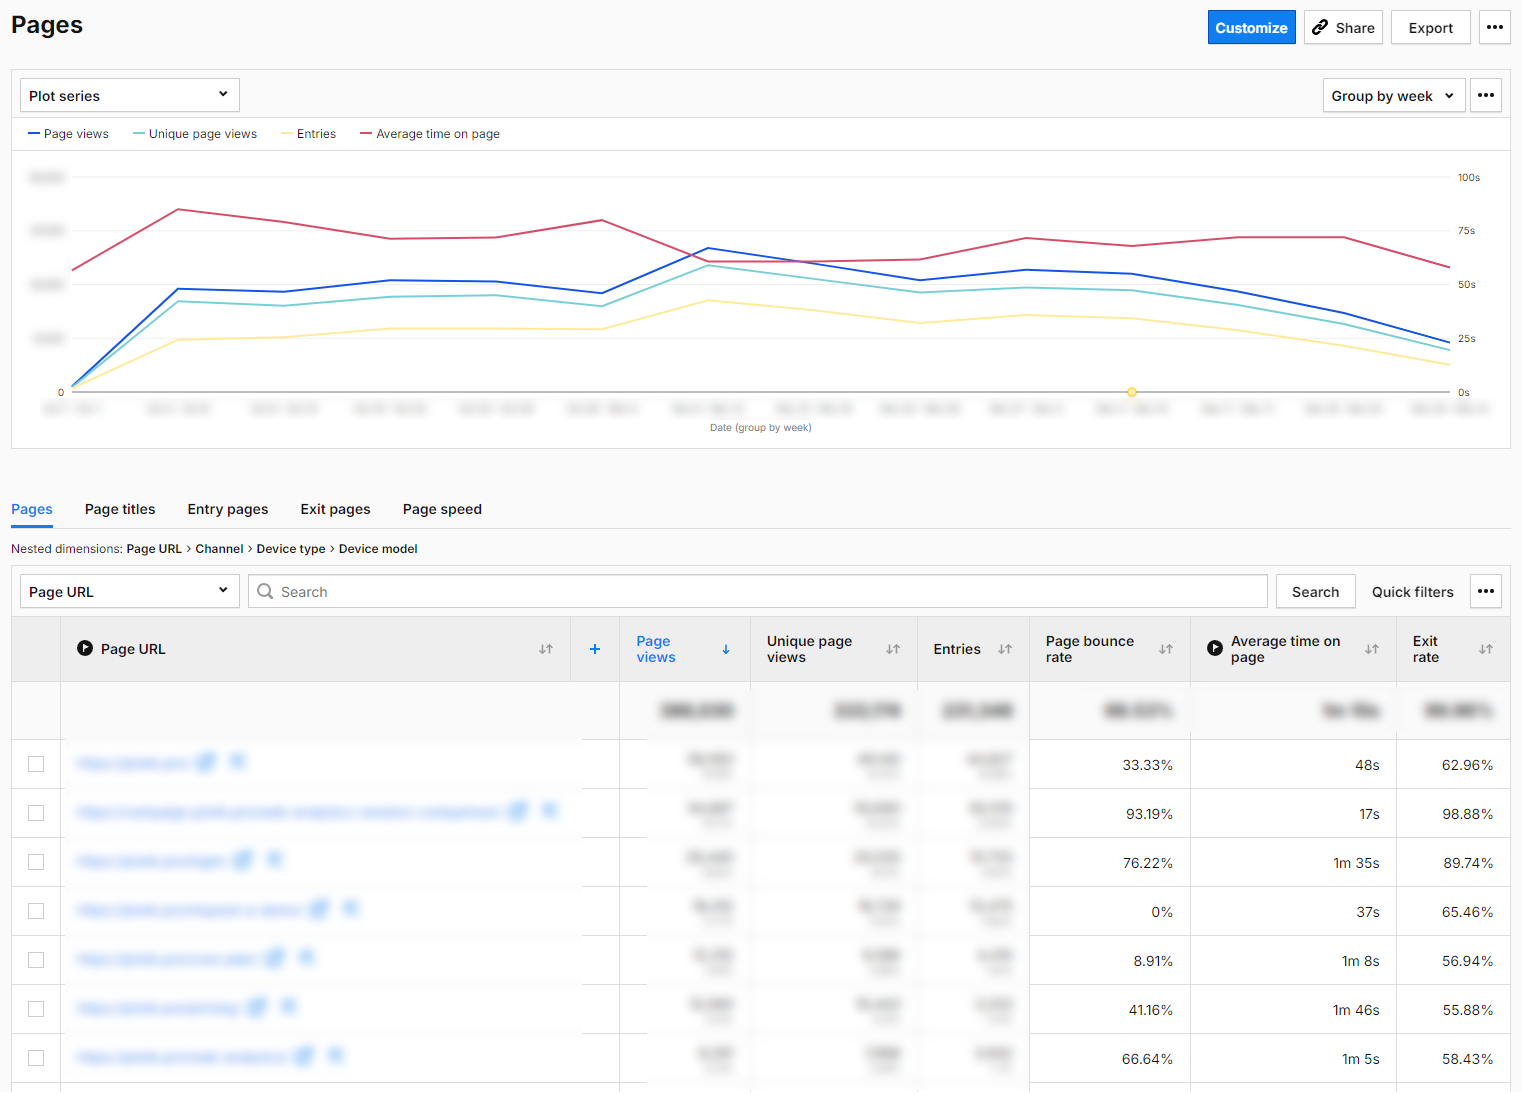 Google Ads optimization using the basic report in Piwik PRO Analytics Suite - Pages